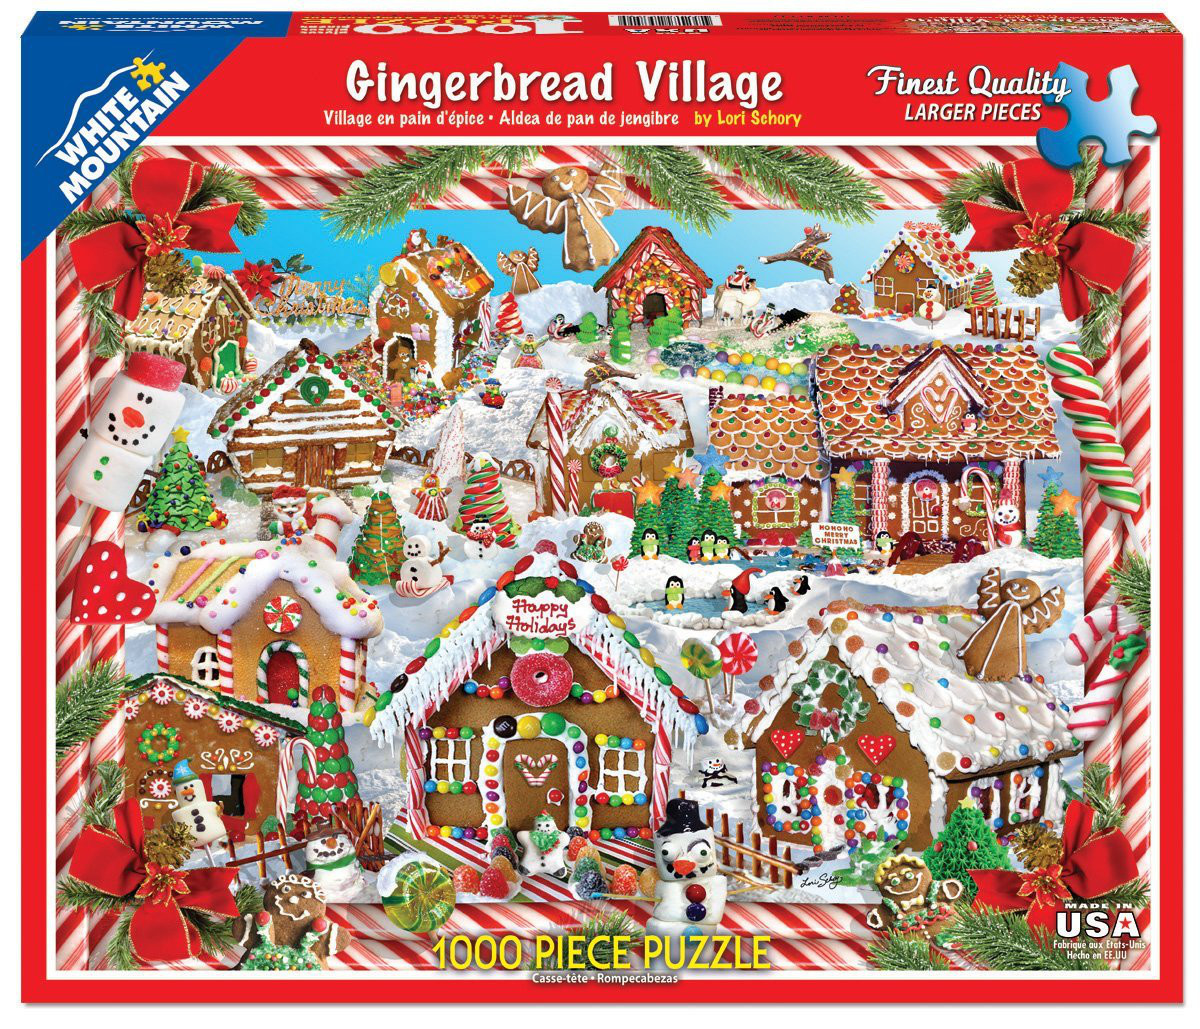 Gingerbread Village Christmas Jigsaw Puzzle